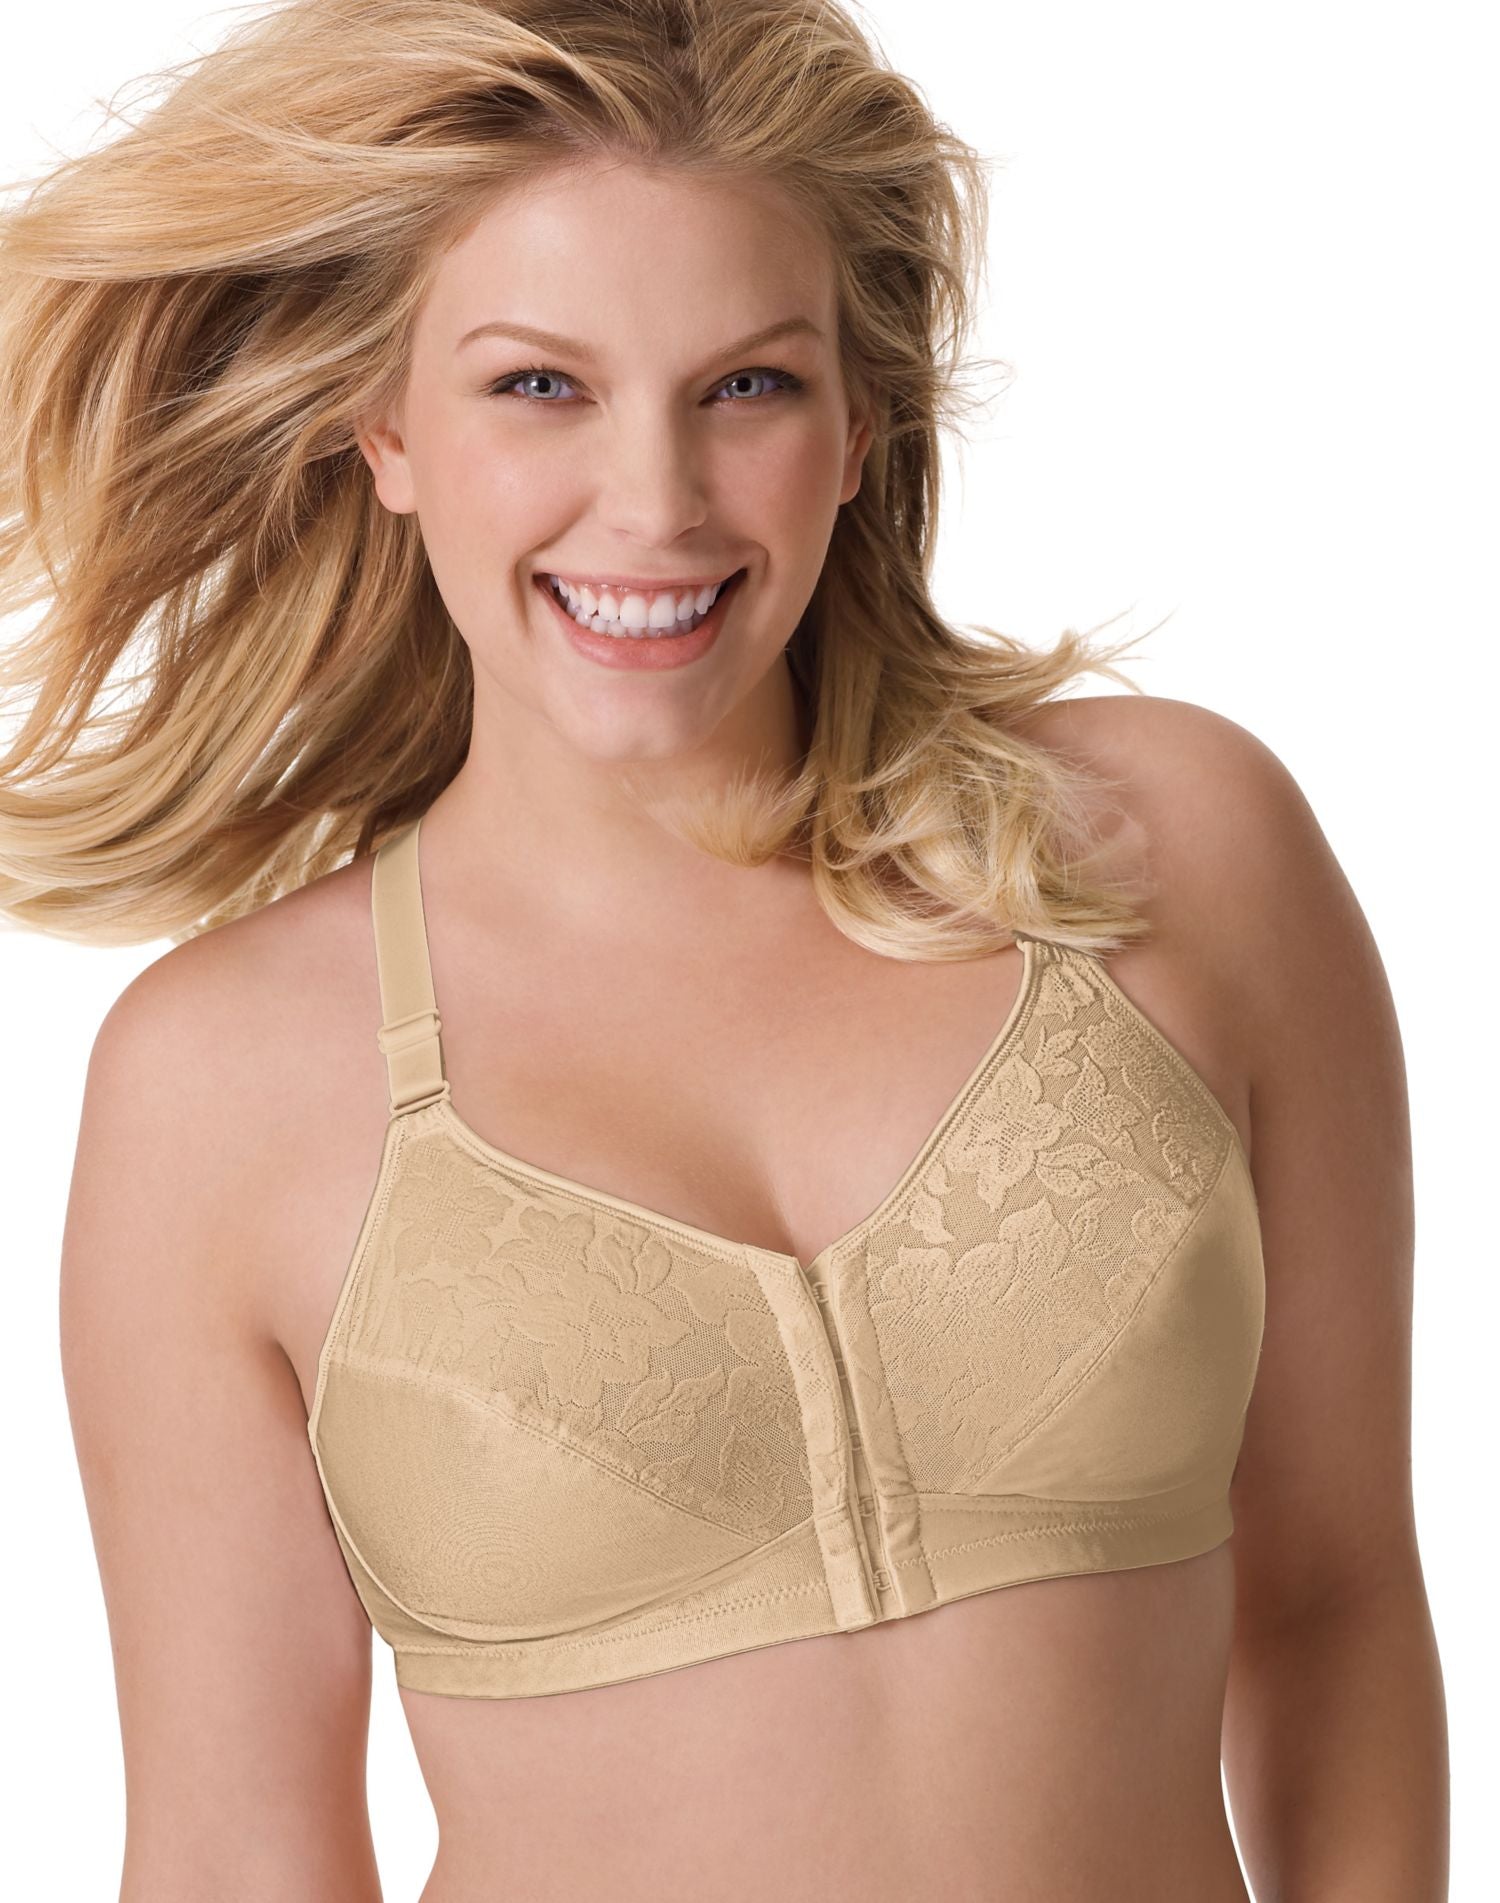 4643 - Playtex 18 Hour Posture Back Front Close Wirefree Bra